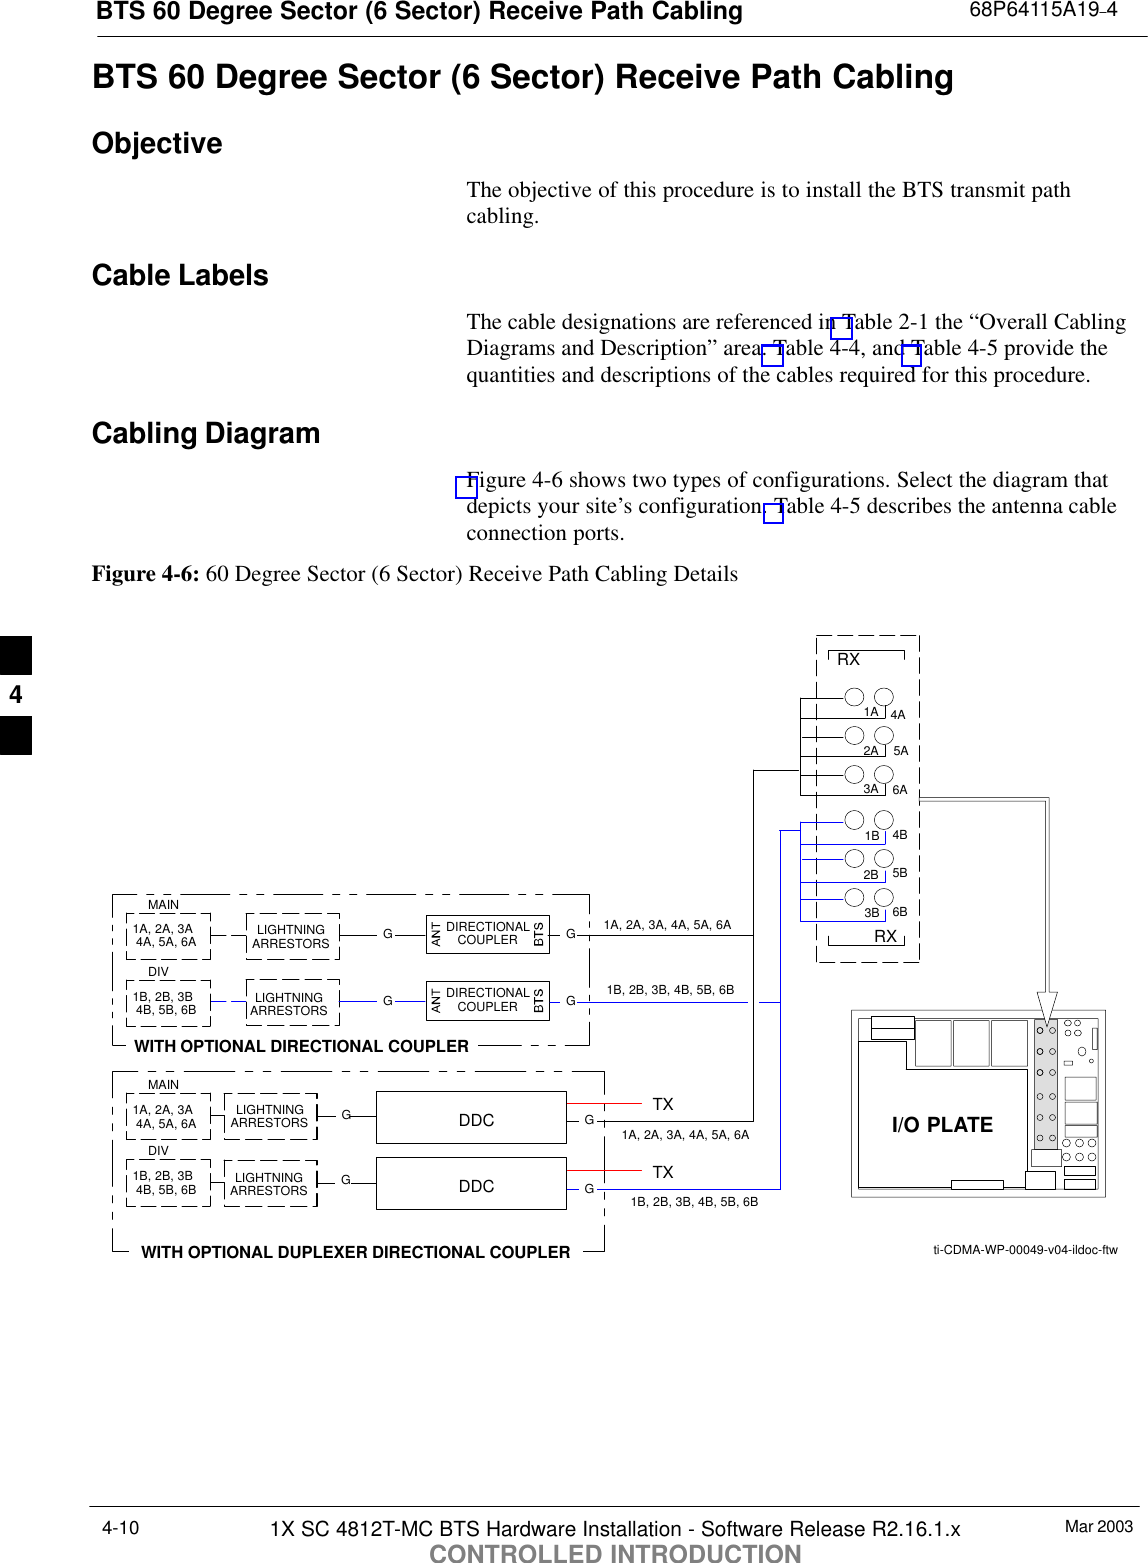 BTS 60 Degree Sector (6 Sector) Receive Path Cabling 68P64115A19–4Mar 20031X SC 4812T-MC BTS Hardware Installation - Software Release R2.16.1.xCONTROLLED INTRODUCTION4-10BTS 60 Degree Sector (6 Sector) Receive Path CablingObjectiveThe objective of this procedure is to install the BTS transmit pathcabling.Cable LabelsThe cable designations are referenced in Table 2-1 the “Overall CablingDiagrams and Description” area. Table 4-4, and Table 4-5 provide thequantities and descriptions of the cables required for this procedure.Cabling DiagramFigure 4-6 shows two types of configurations. Select the diagram thatdepicts your site’s configuration. Table 4-5 describes the antenna cableconnection ports.Figure 4-6: 60 Degree Sector (6 Sector) Receive Path Cabling DetailsLIGHTNINGARRESTORSWITH OPTIONAL DIRECTIONAL COUPLERWITH OPTIONAL DUPLEXER DIRECTIONAL COUPLERDIRECTIONALCOUPLERLIGHTNINGARRESTORSLIGHTNINGARRESTORSDIRECTIONALCOUPLERLIGHTNINGARRESTORSGGGGGG1A, 2A, 3A 4A, 5A, 6AMAINDIV1B, 2B, 3B 4B, 5B, 6B1A, 2A, 3A 4A, 5A, 6AMAINDIV1B, 2B, 3B 4B, 5B, 6BDDCDDCti-CDMA-WP-00049-v04-ildoc-ftw3A2A6A5A4A3B2B1B6B5B4B1ARXRXI/O PLATEGG1B, 2B, 3B, 4B, 5B, 6B1A, 2A, 3A, 4A, 5A, 6A1A, 2A, 3A, 4A, 5A, 6A1B, 2B, 3B, 4B, 5B, 6BTXTX4